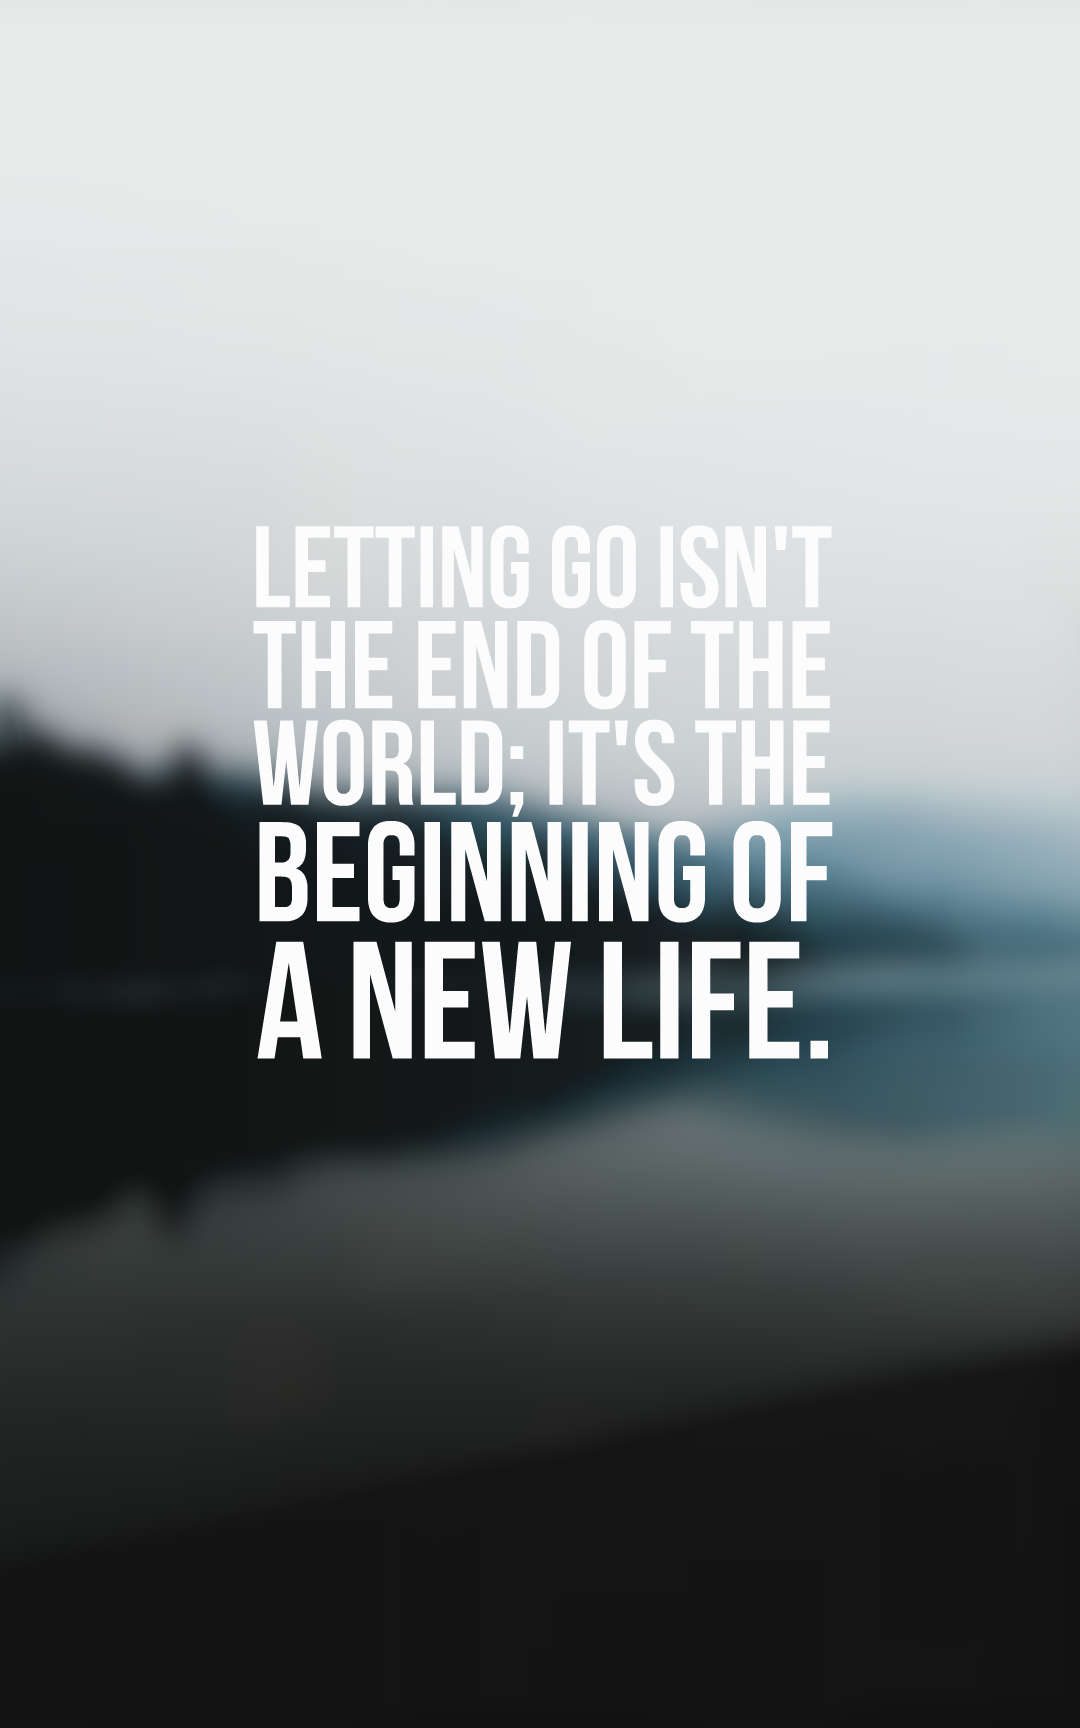 100 Inspirational Letting Go And Moving On Quotes